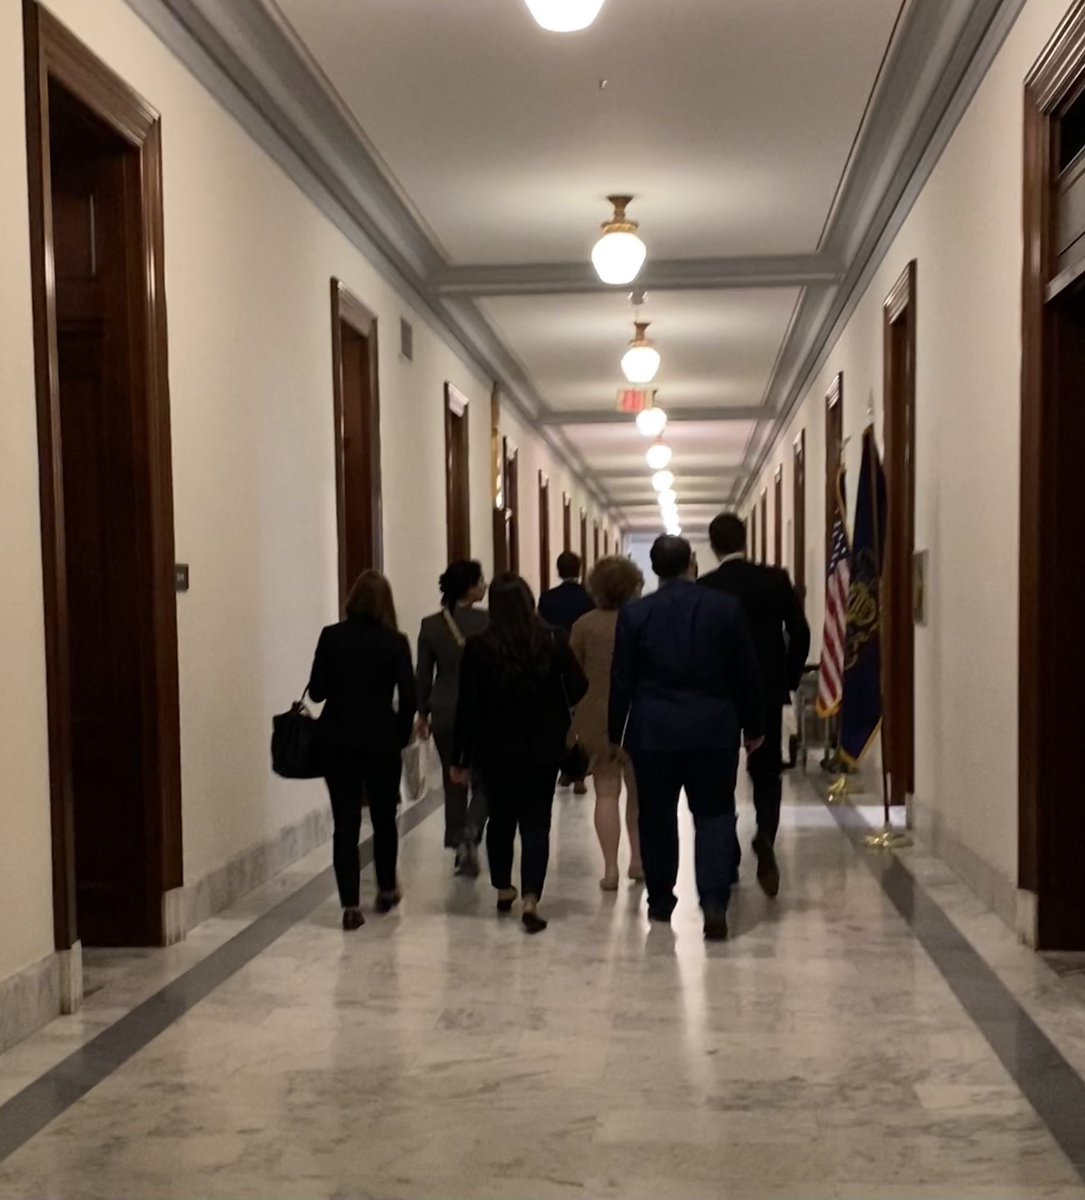 Walking into senate offices with a mission. #ACRRAN #ACRHillDay2023
@PAradsociety